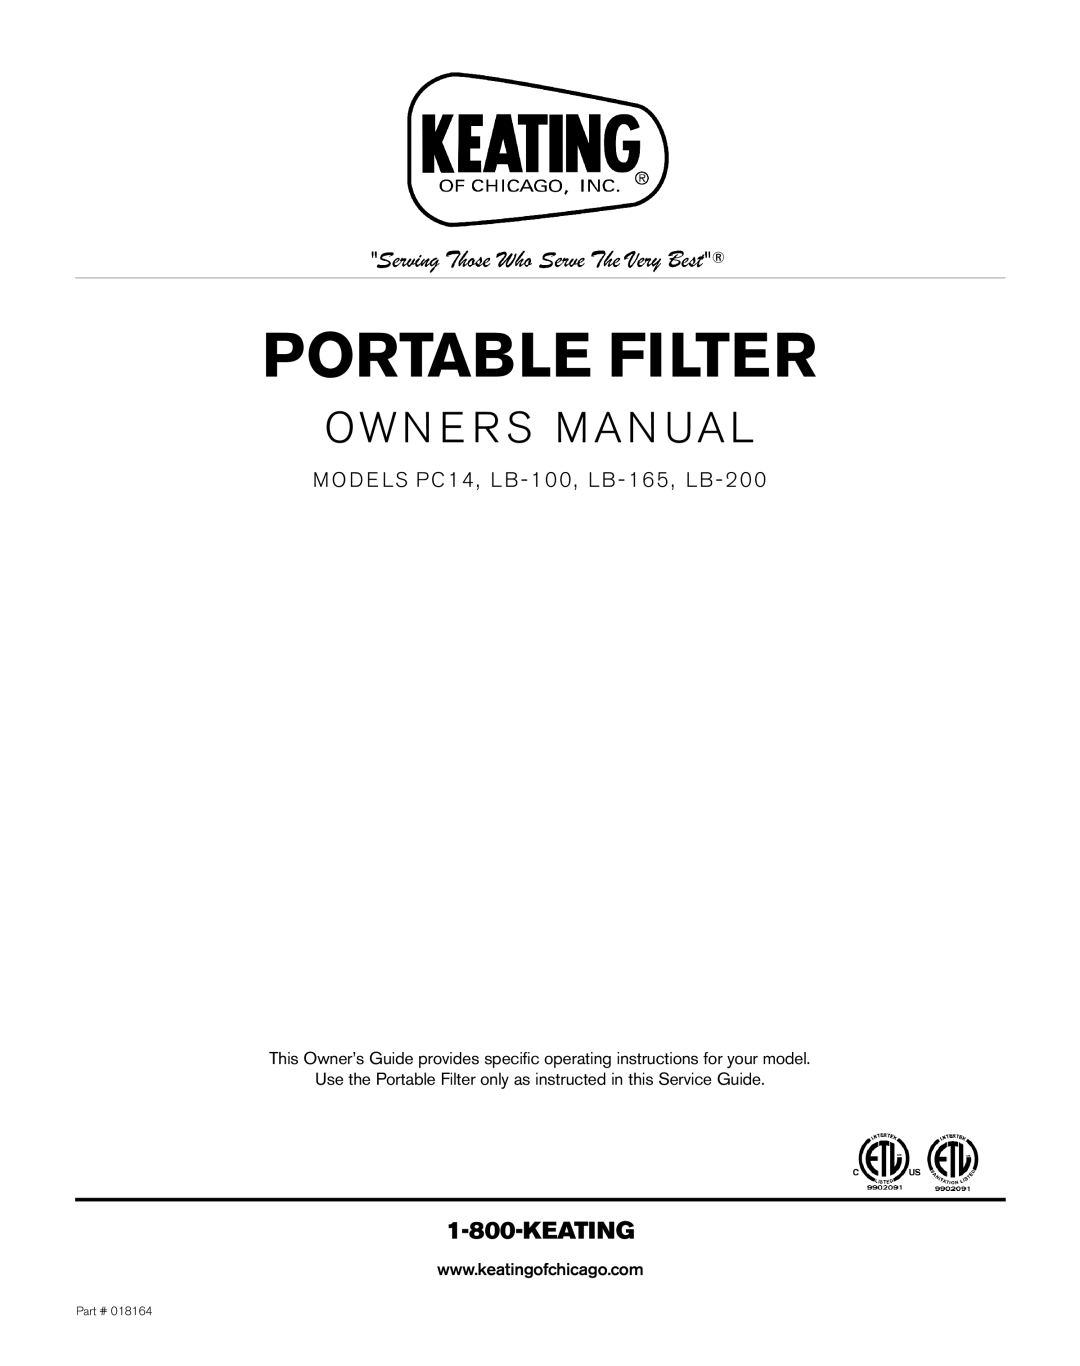 Keating Of Chicago LB-100 owner manual Portable Filter, Own E R S Man Ual, M O D E LS PC14, LB - 100, LB - 165, LB 